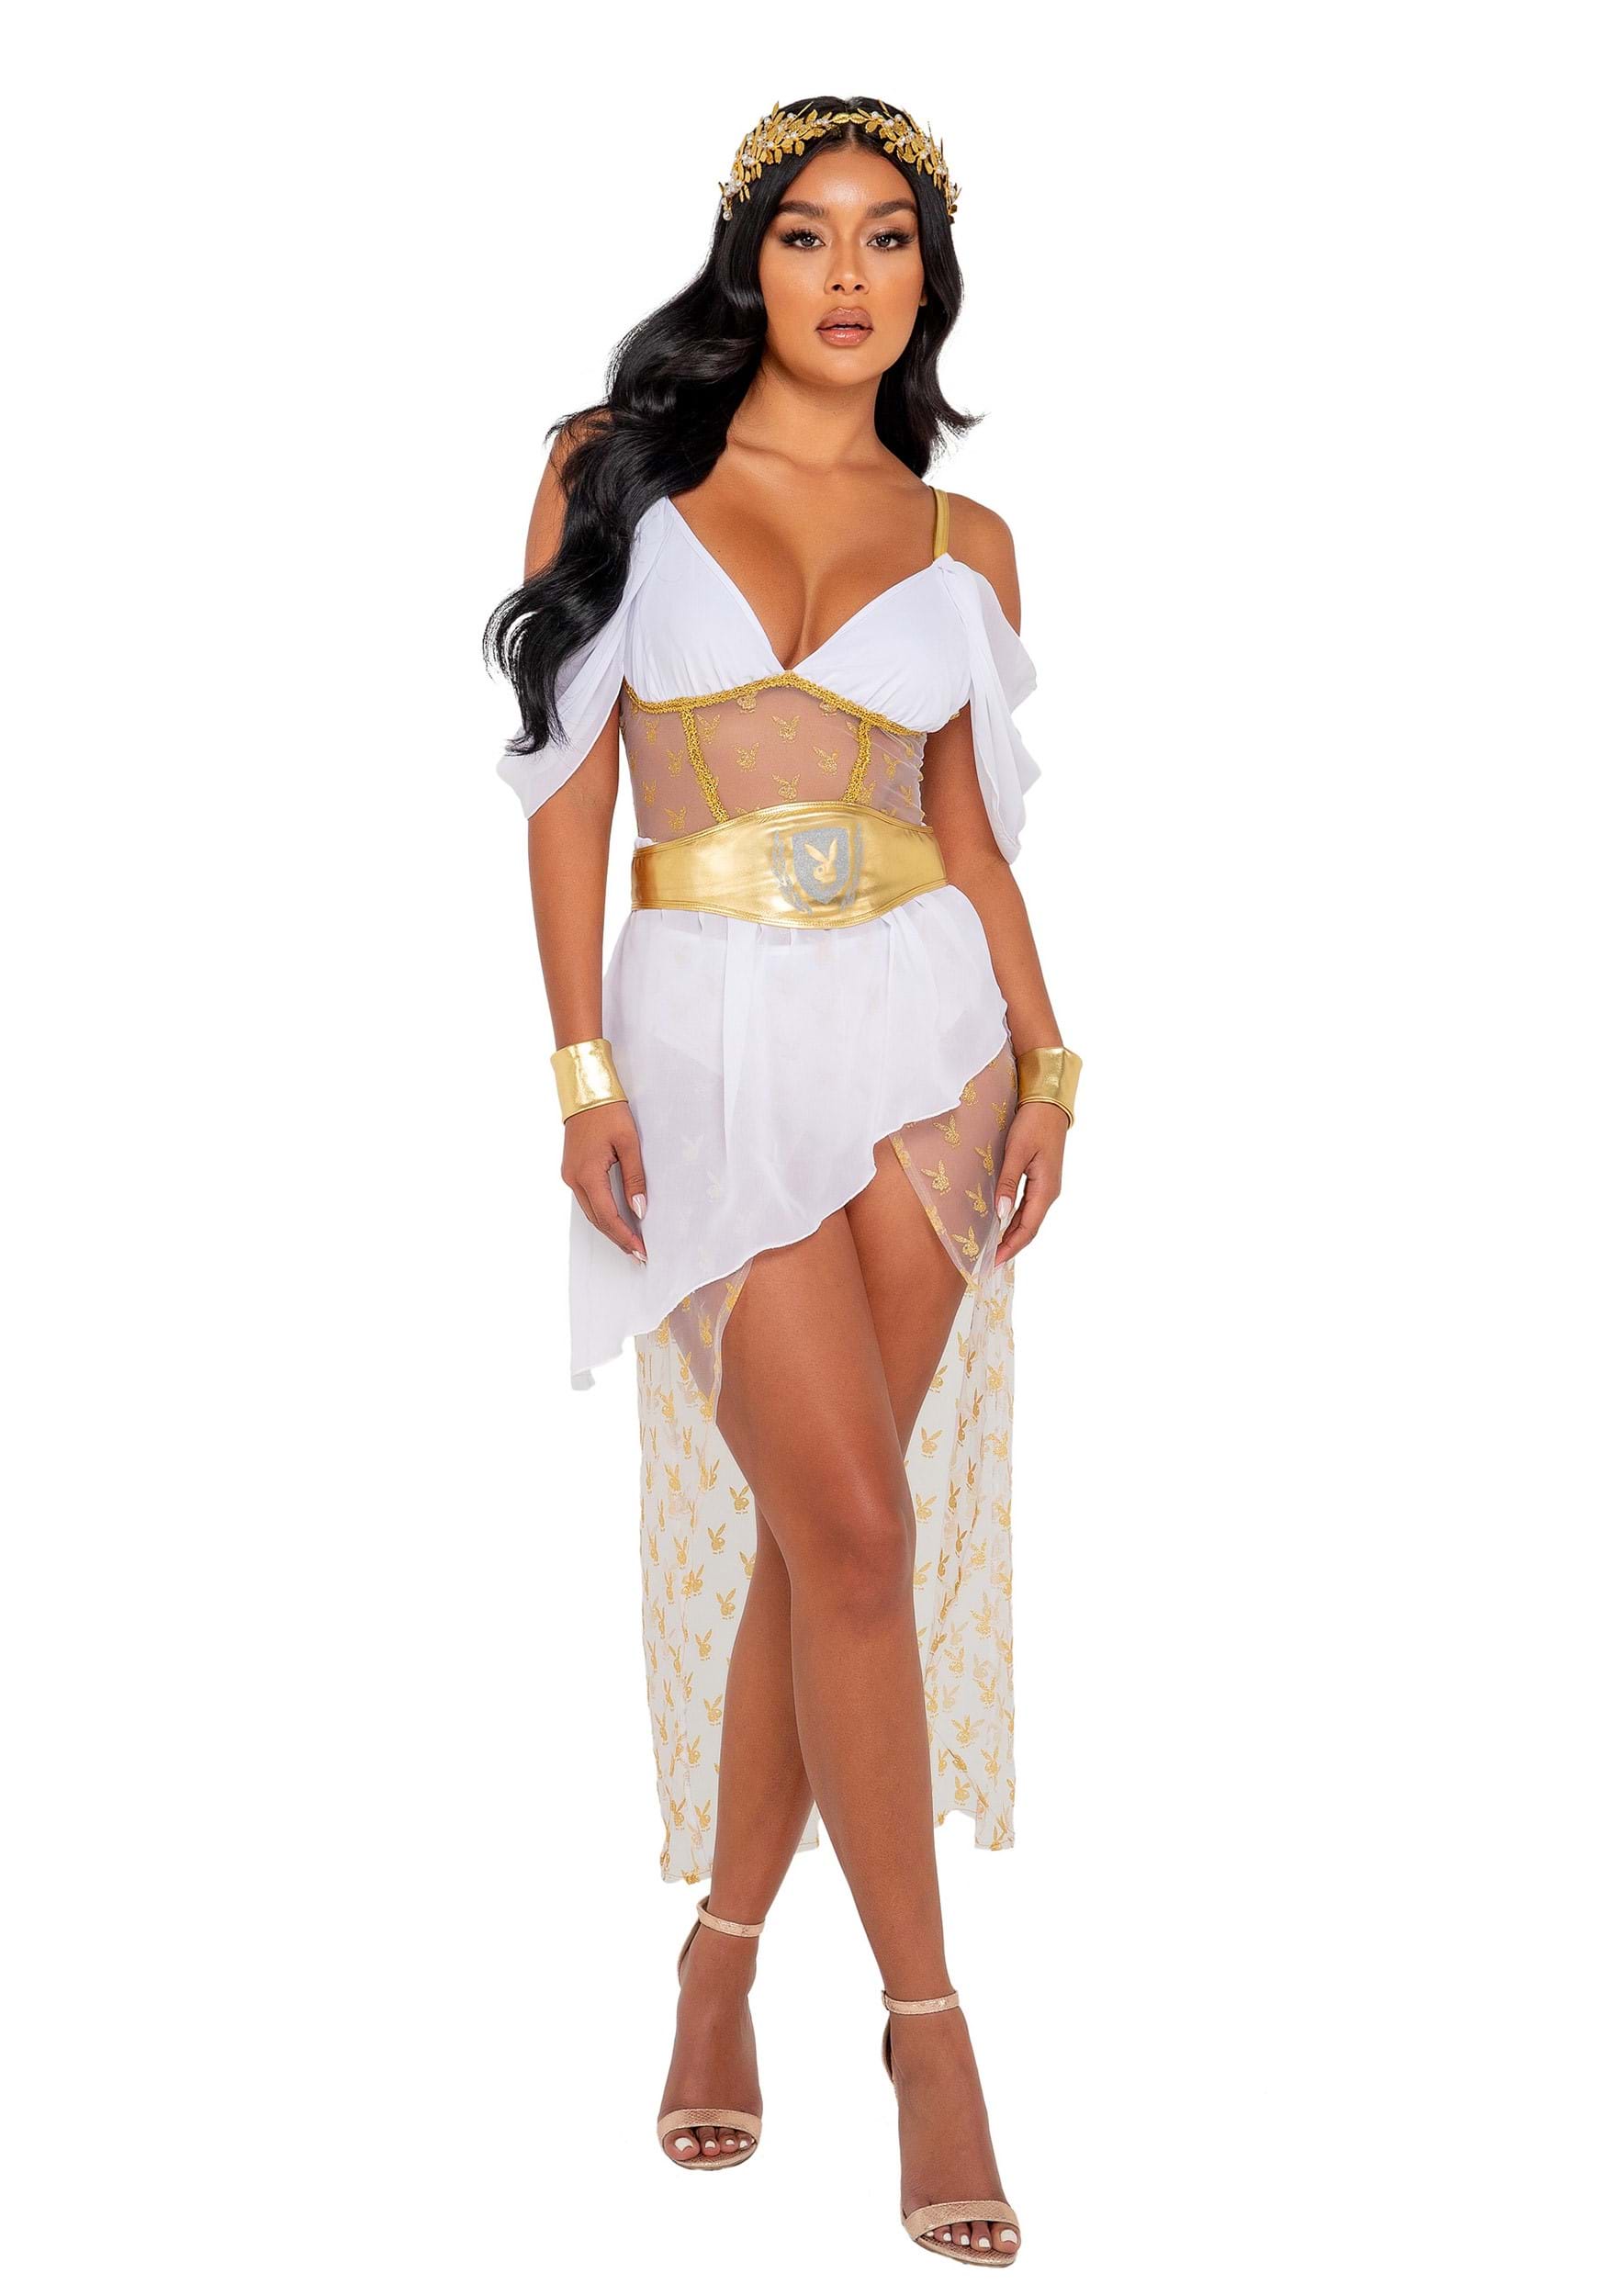 https://images.fun.com/products/83844/1-1/playboy-goddess-costume-for-women-.jpg